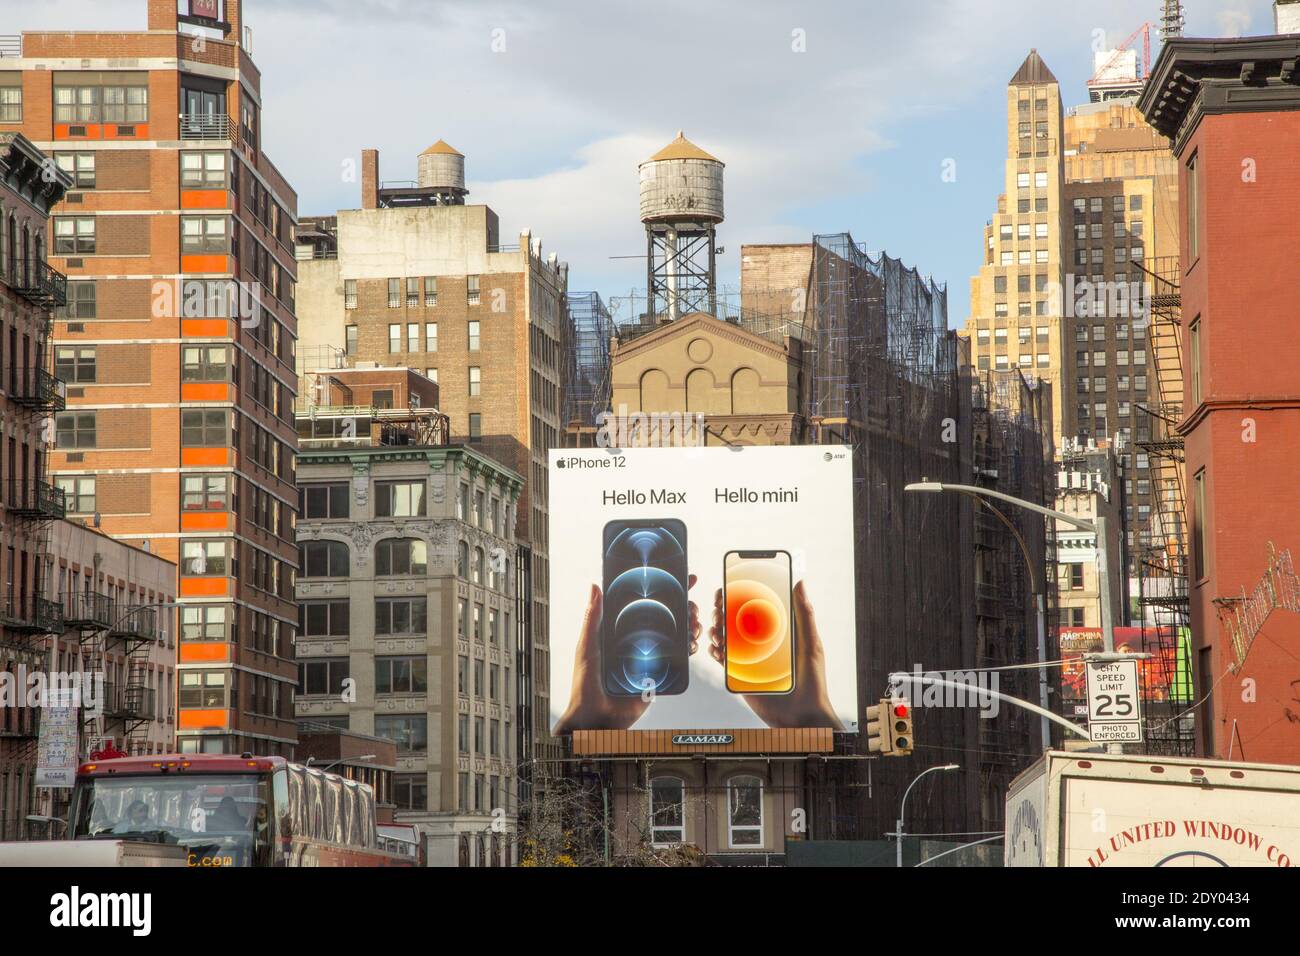 iphone billboard stands out on Canal Street in Manhattan surronded by New York rooftops, classic water towers and all. Stock Photo